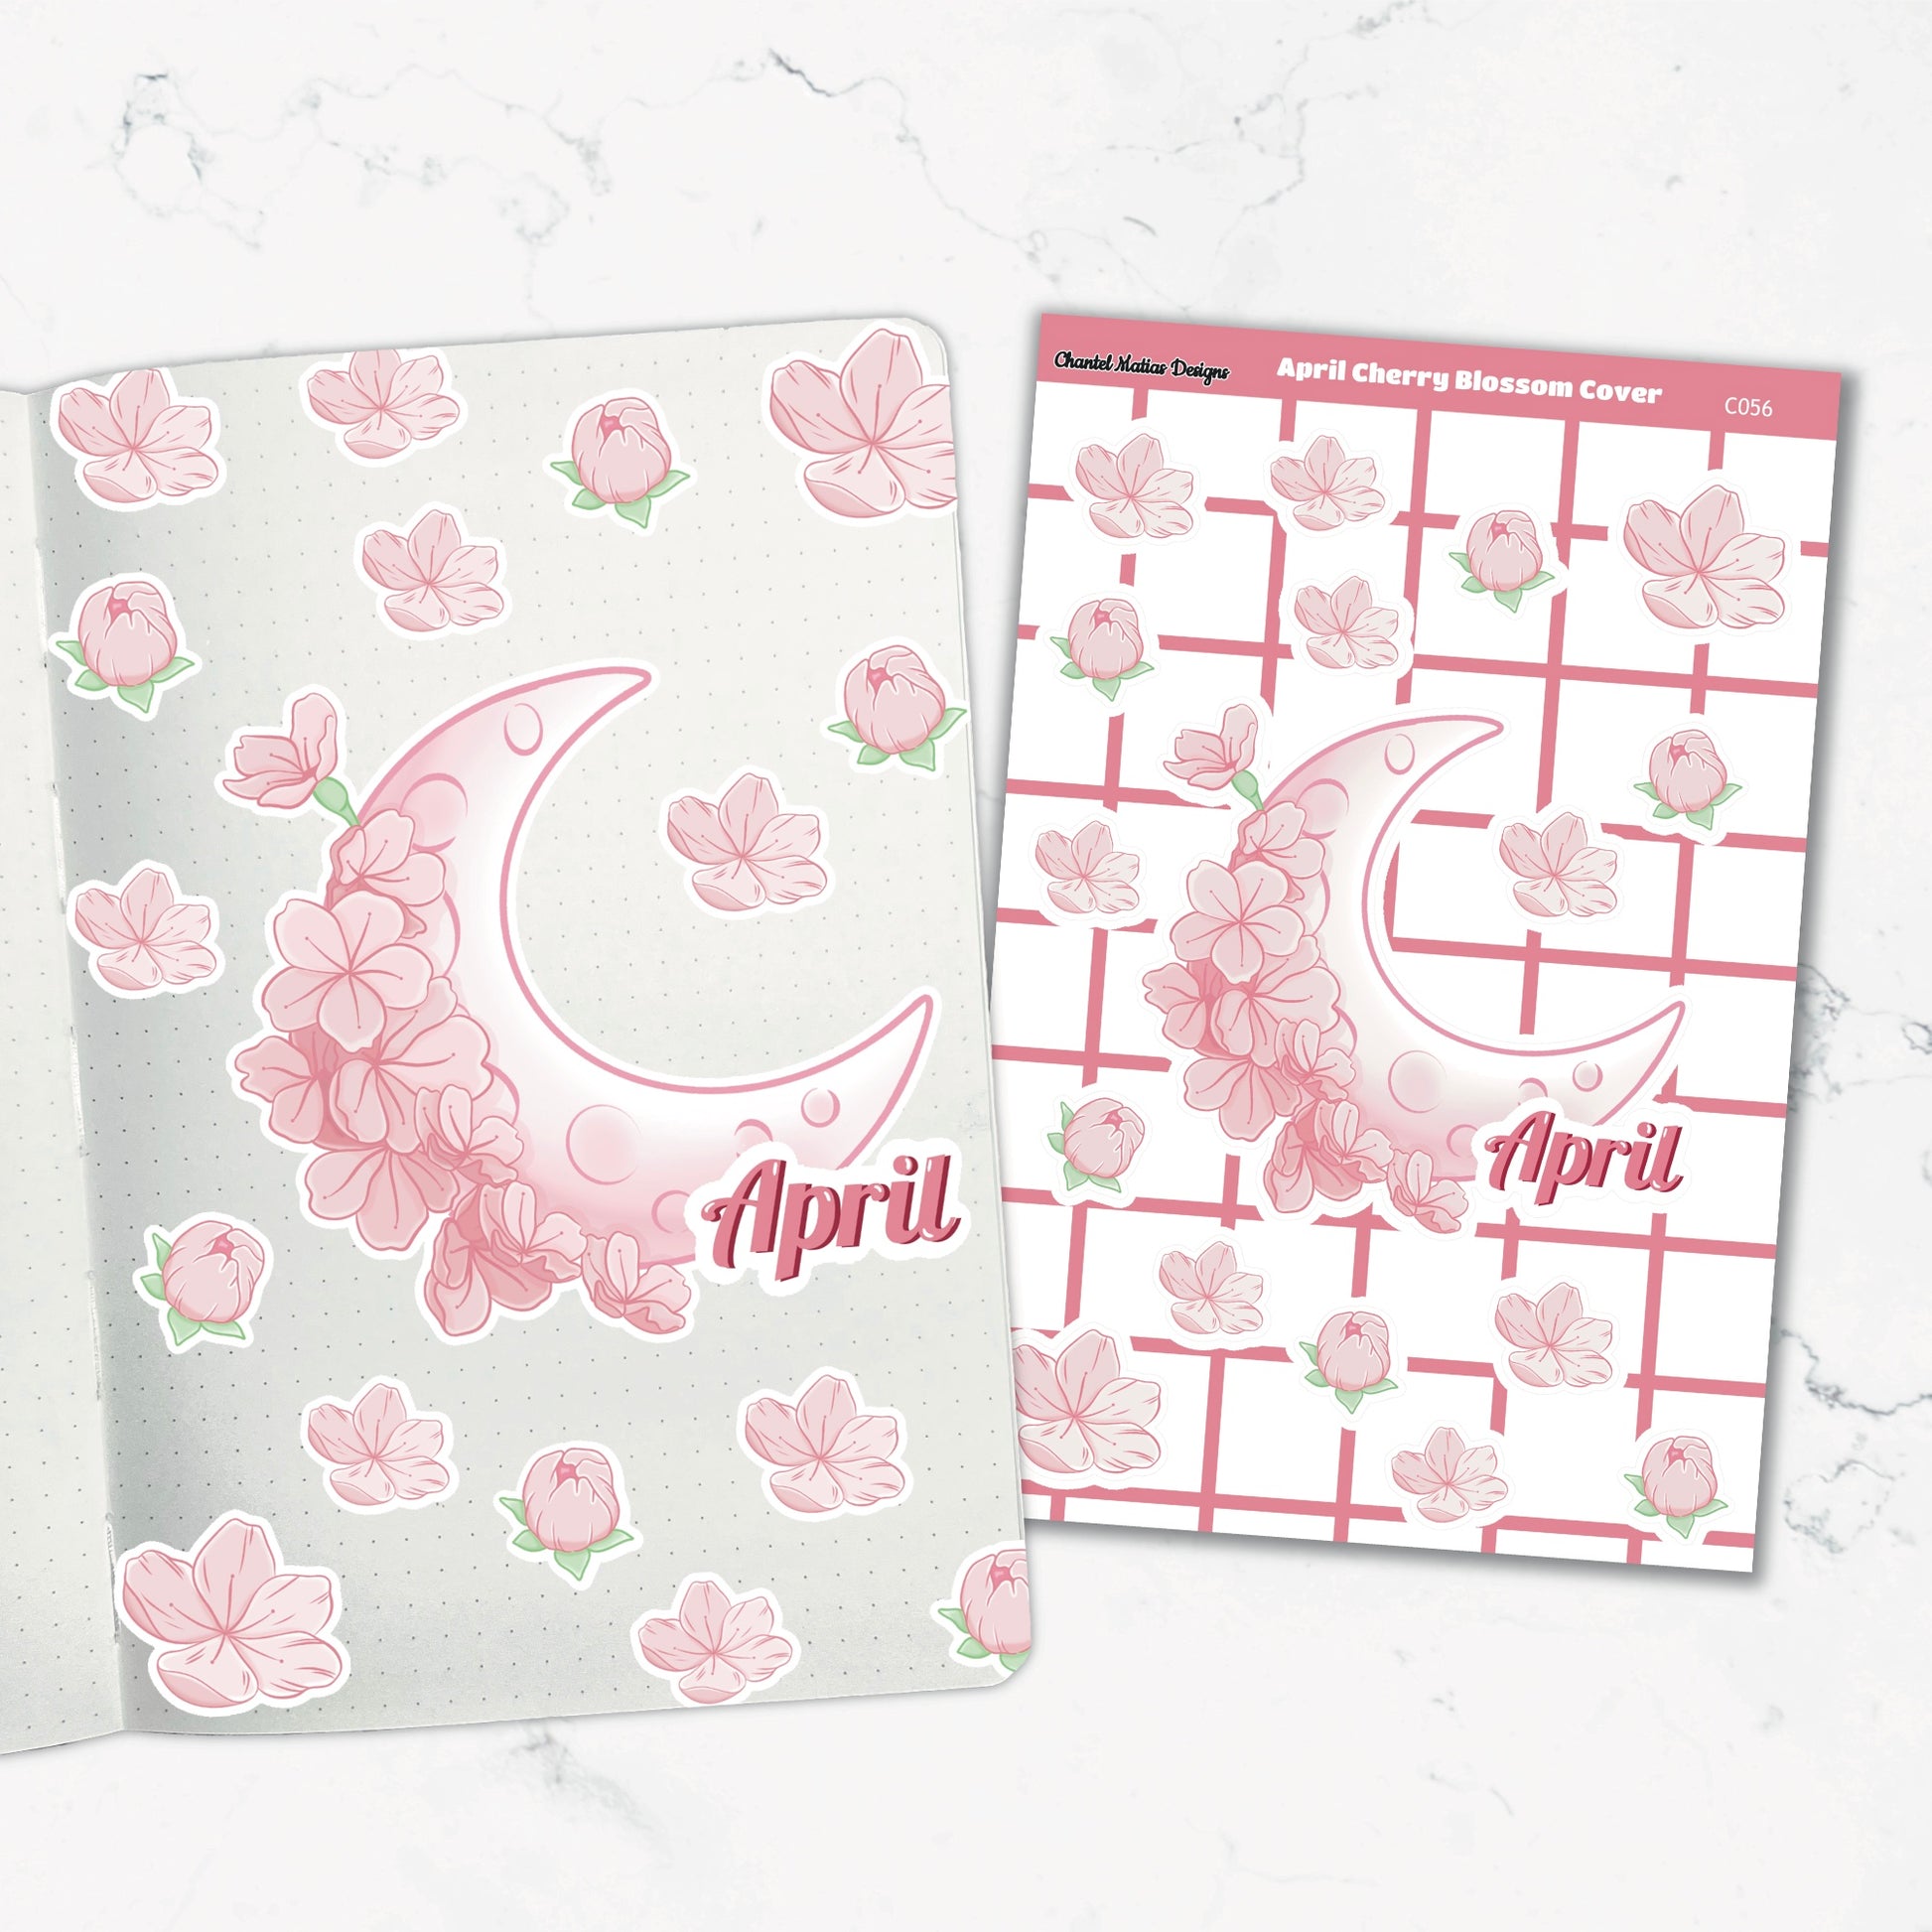 Decorative April bullet journal cover page sticker cherry blossom theme. Ideal for monthly cover page ideas, this sticker enhances your Bujo cover title page for April. beautiful springtime cherry blossoms, perfect for personalizing your journal